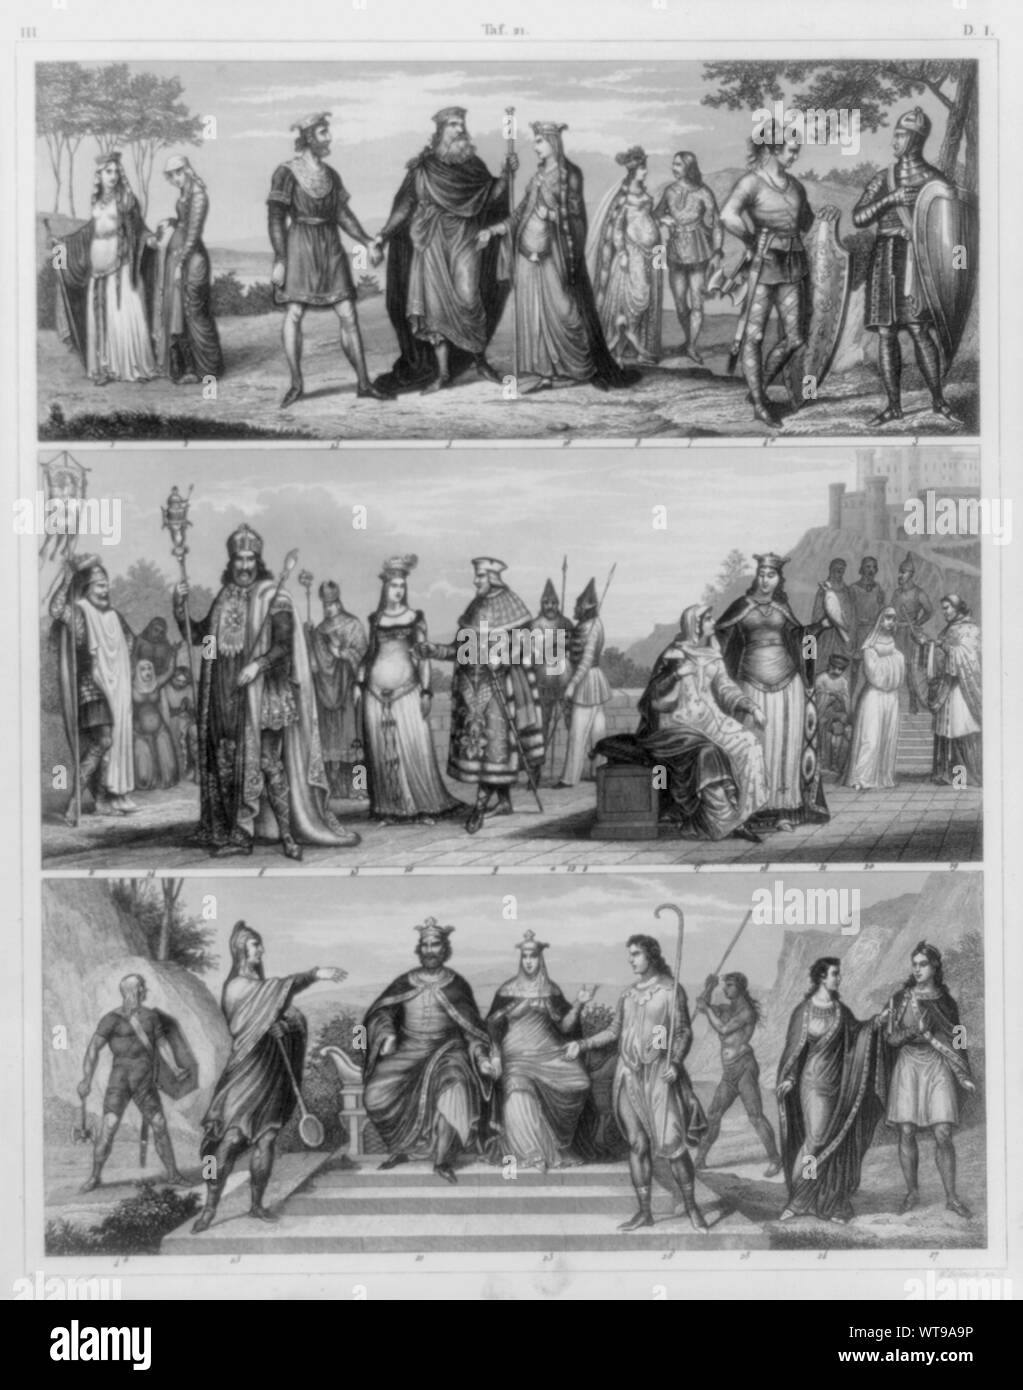 Medieval costumes of Central Europe: fig. 1 Queen Clotilda; fig. 2 Maid of honor; fig. 3 Frankish leader; fig. 4 Frankish warriors; fig. 5 King Clovis; fig. 6, Charlemagne; fig. 7, 8 Prince & Princess; fig. 9, 10 Noble & wife; fig. 11 Leader under Charlemagne; fig. 12 Warriors; fig. 13 Bishop; fig. 14 common people; fig. 15-18 Frankish royal family; fig. 19, 20 Plebendary & nun; fig. 21 Citizen; fig. 22, 23 Norman king & queen; fig. 24-26 Norman nobles; fig. 27, 28 Norman citizen Stock Photo